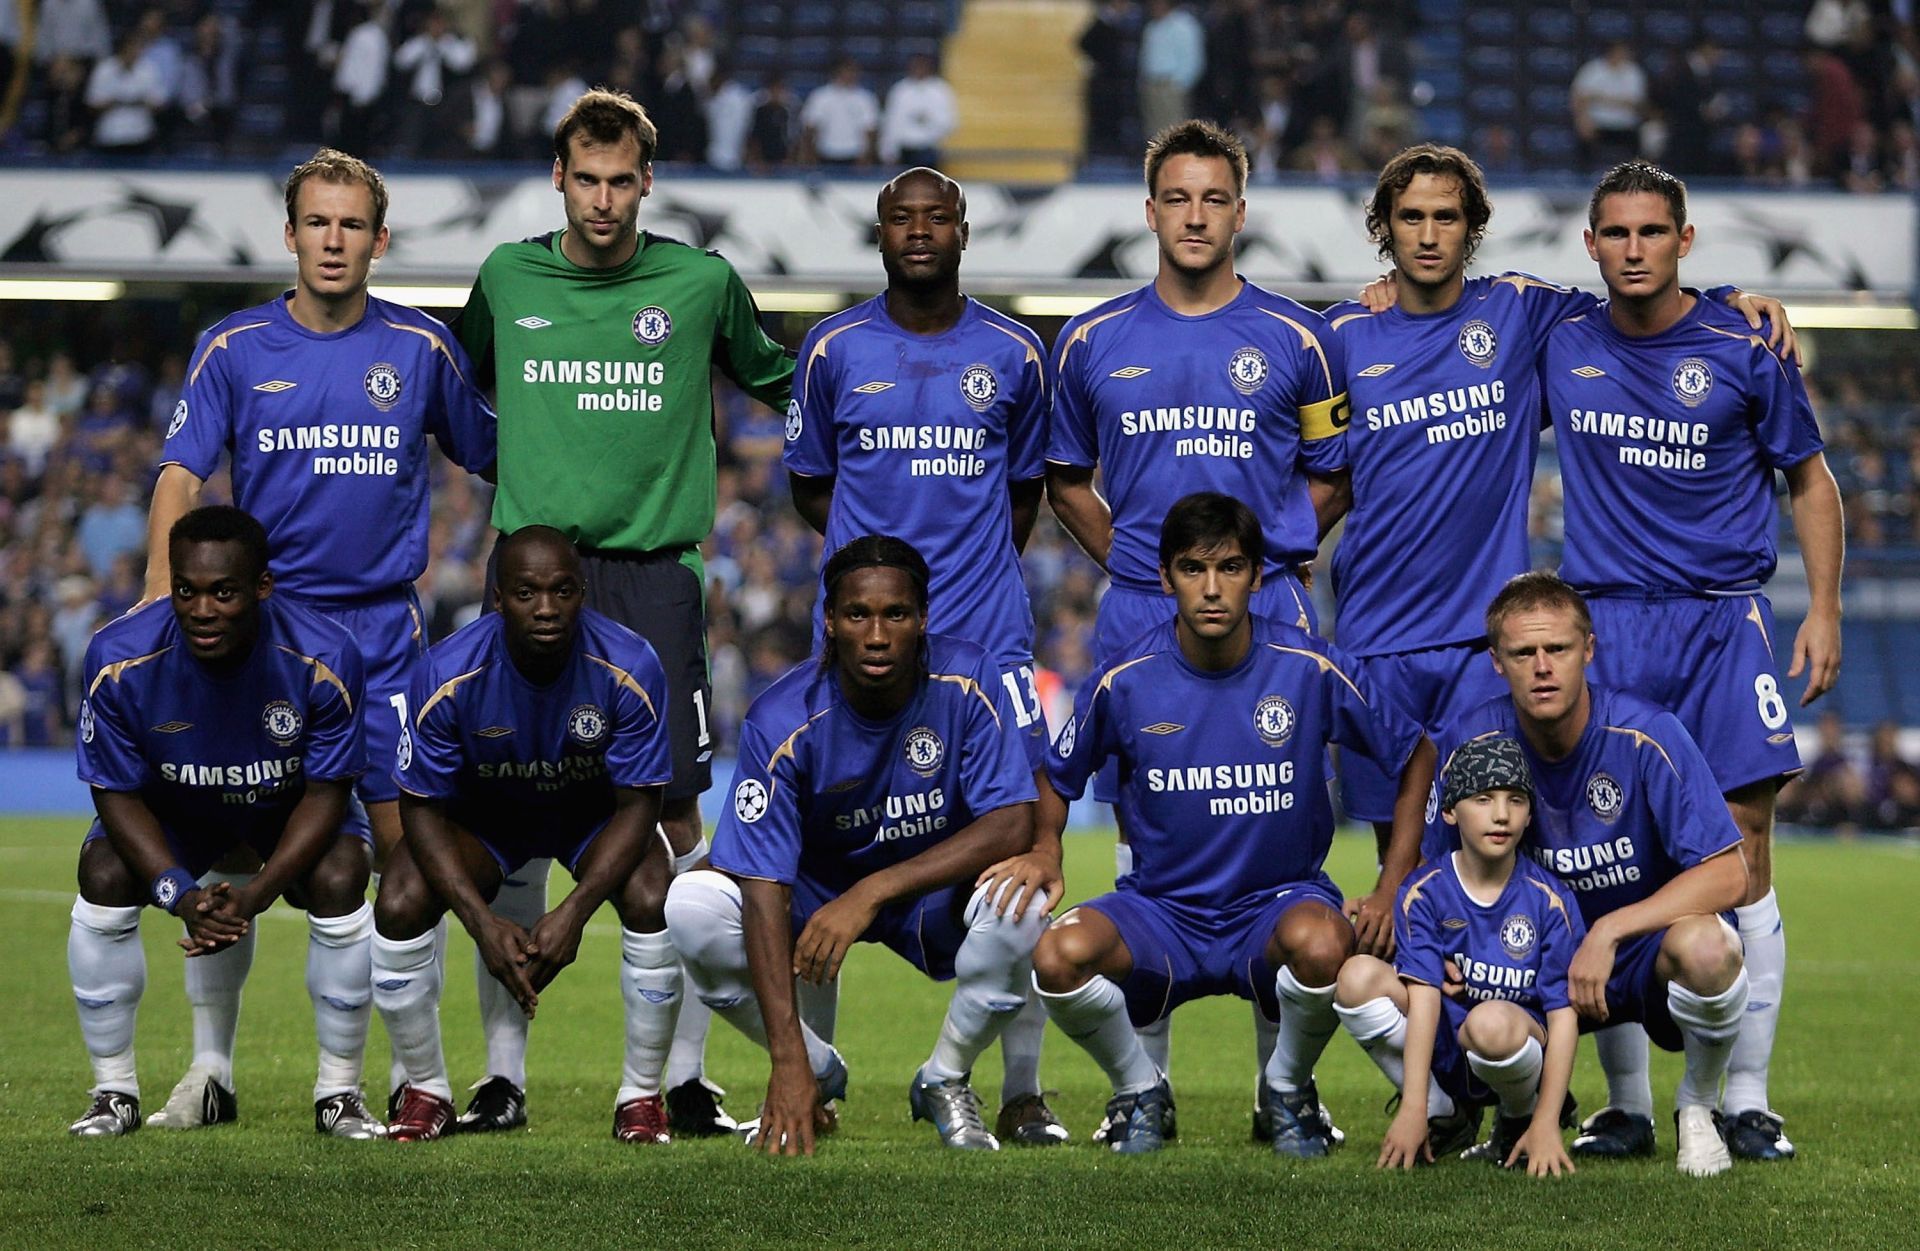 Chelsea won the 2004-05 Premier League on the back of a solid defence